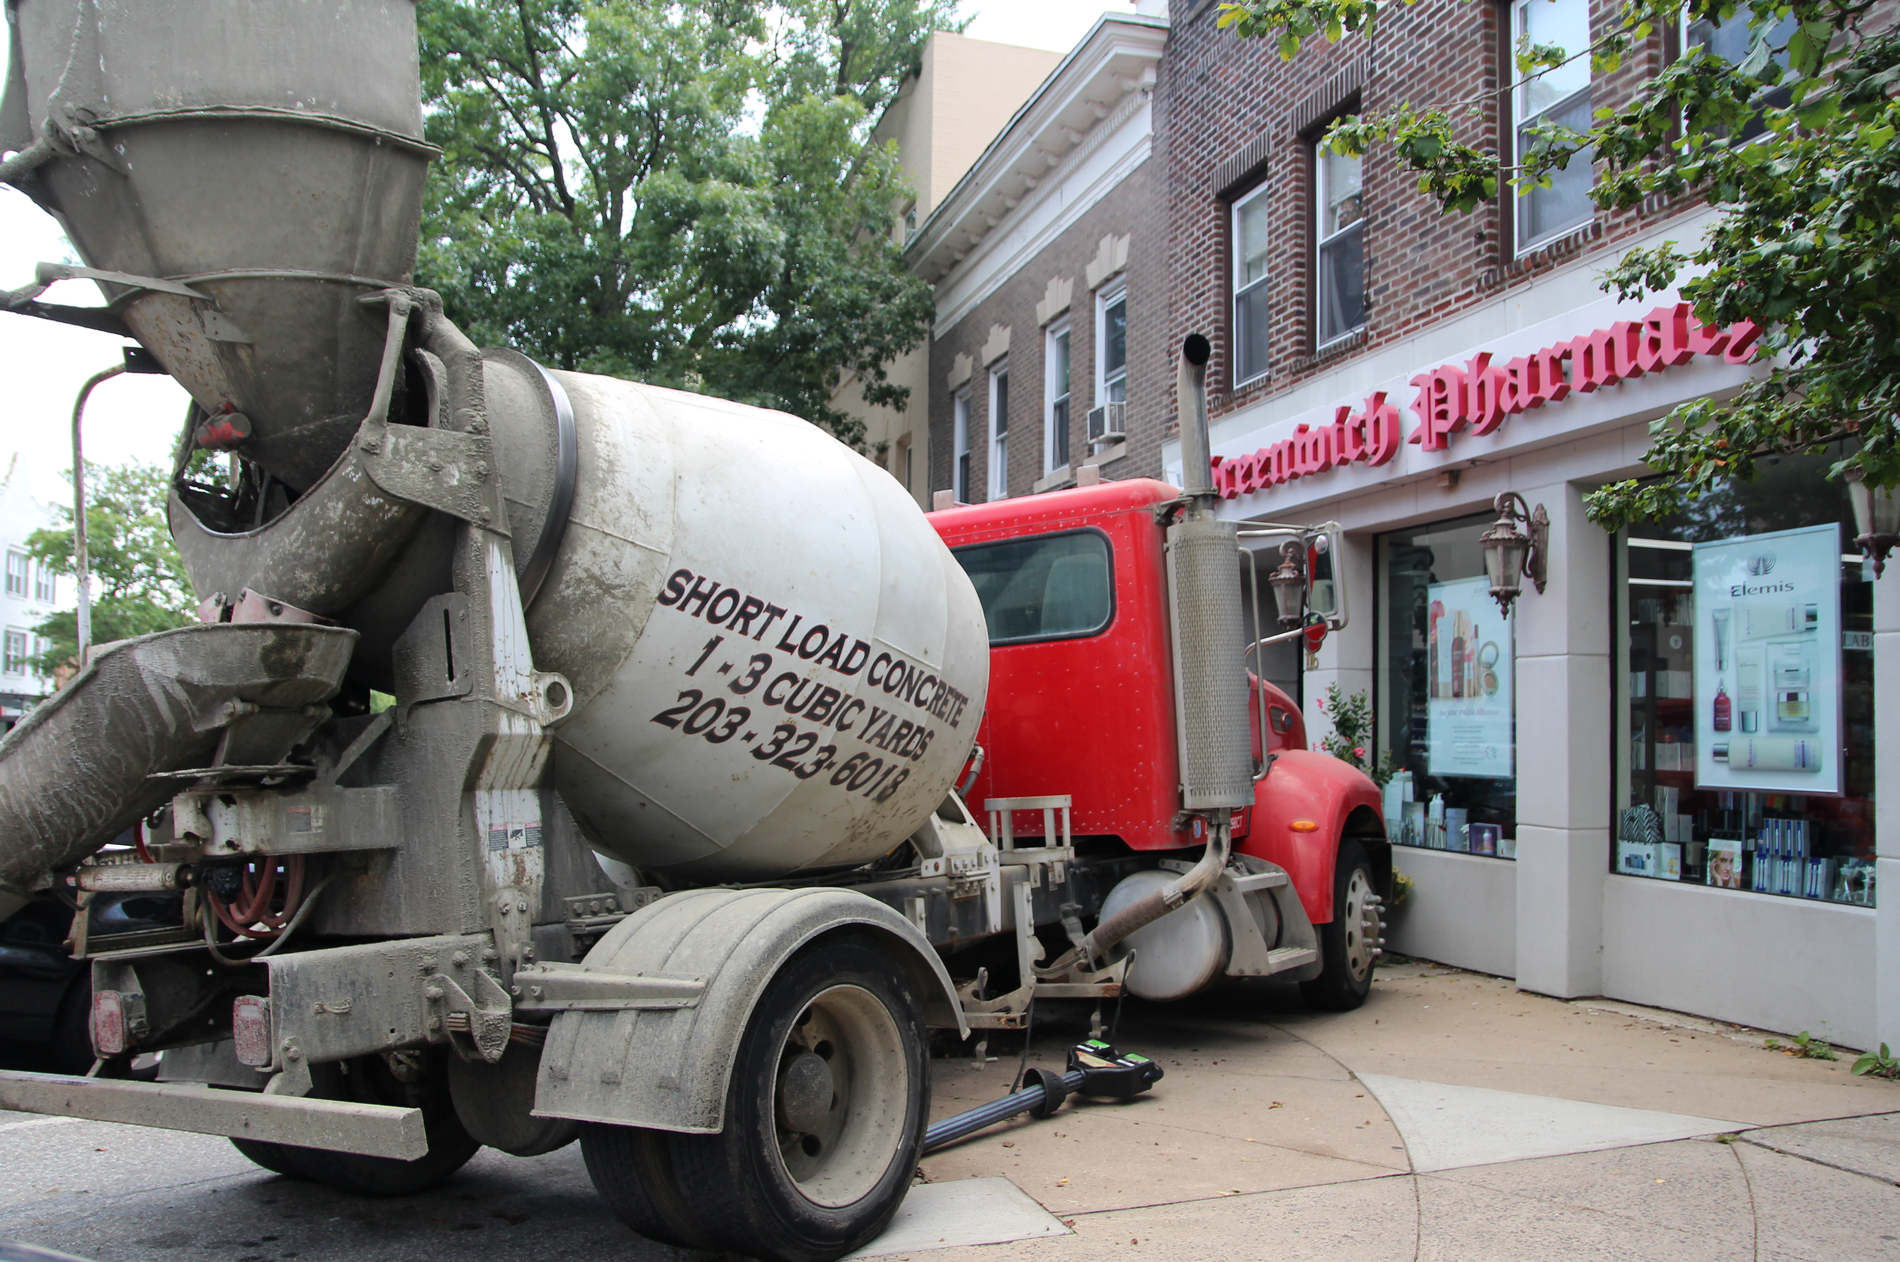 A cement truck hit two cars on Greenwich Avenue. Aug 8, 2019 Photo: Leslie Yager